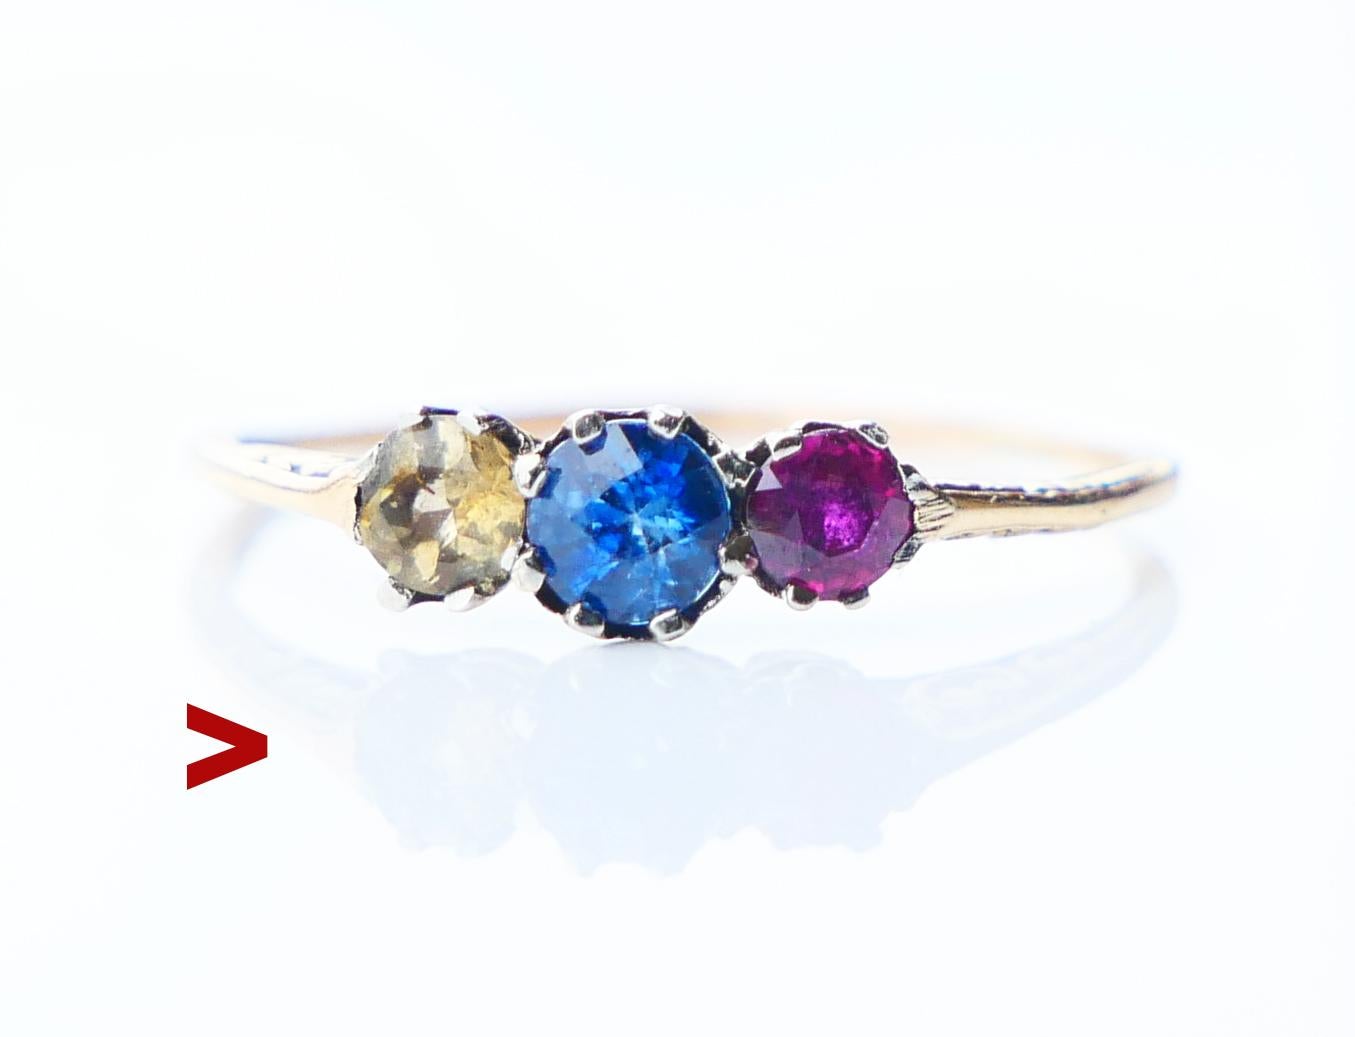 Antique Ring in solid 18K Yellow Gold band with Platinum /or White Gold clusters holding 3 natural old European cut Sapphires. Sapphire in Blue of medium intensity Ø 3.75 mm / ca 0.25 ct with color zoning and inclusions. Yellow and Ruby / or Red